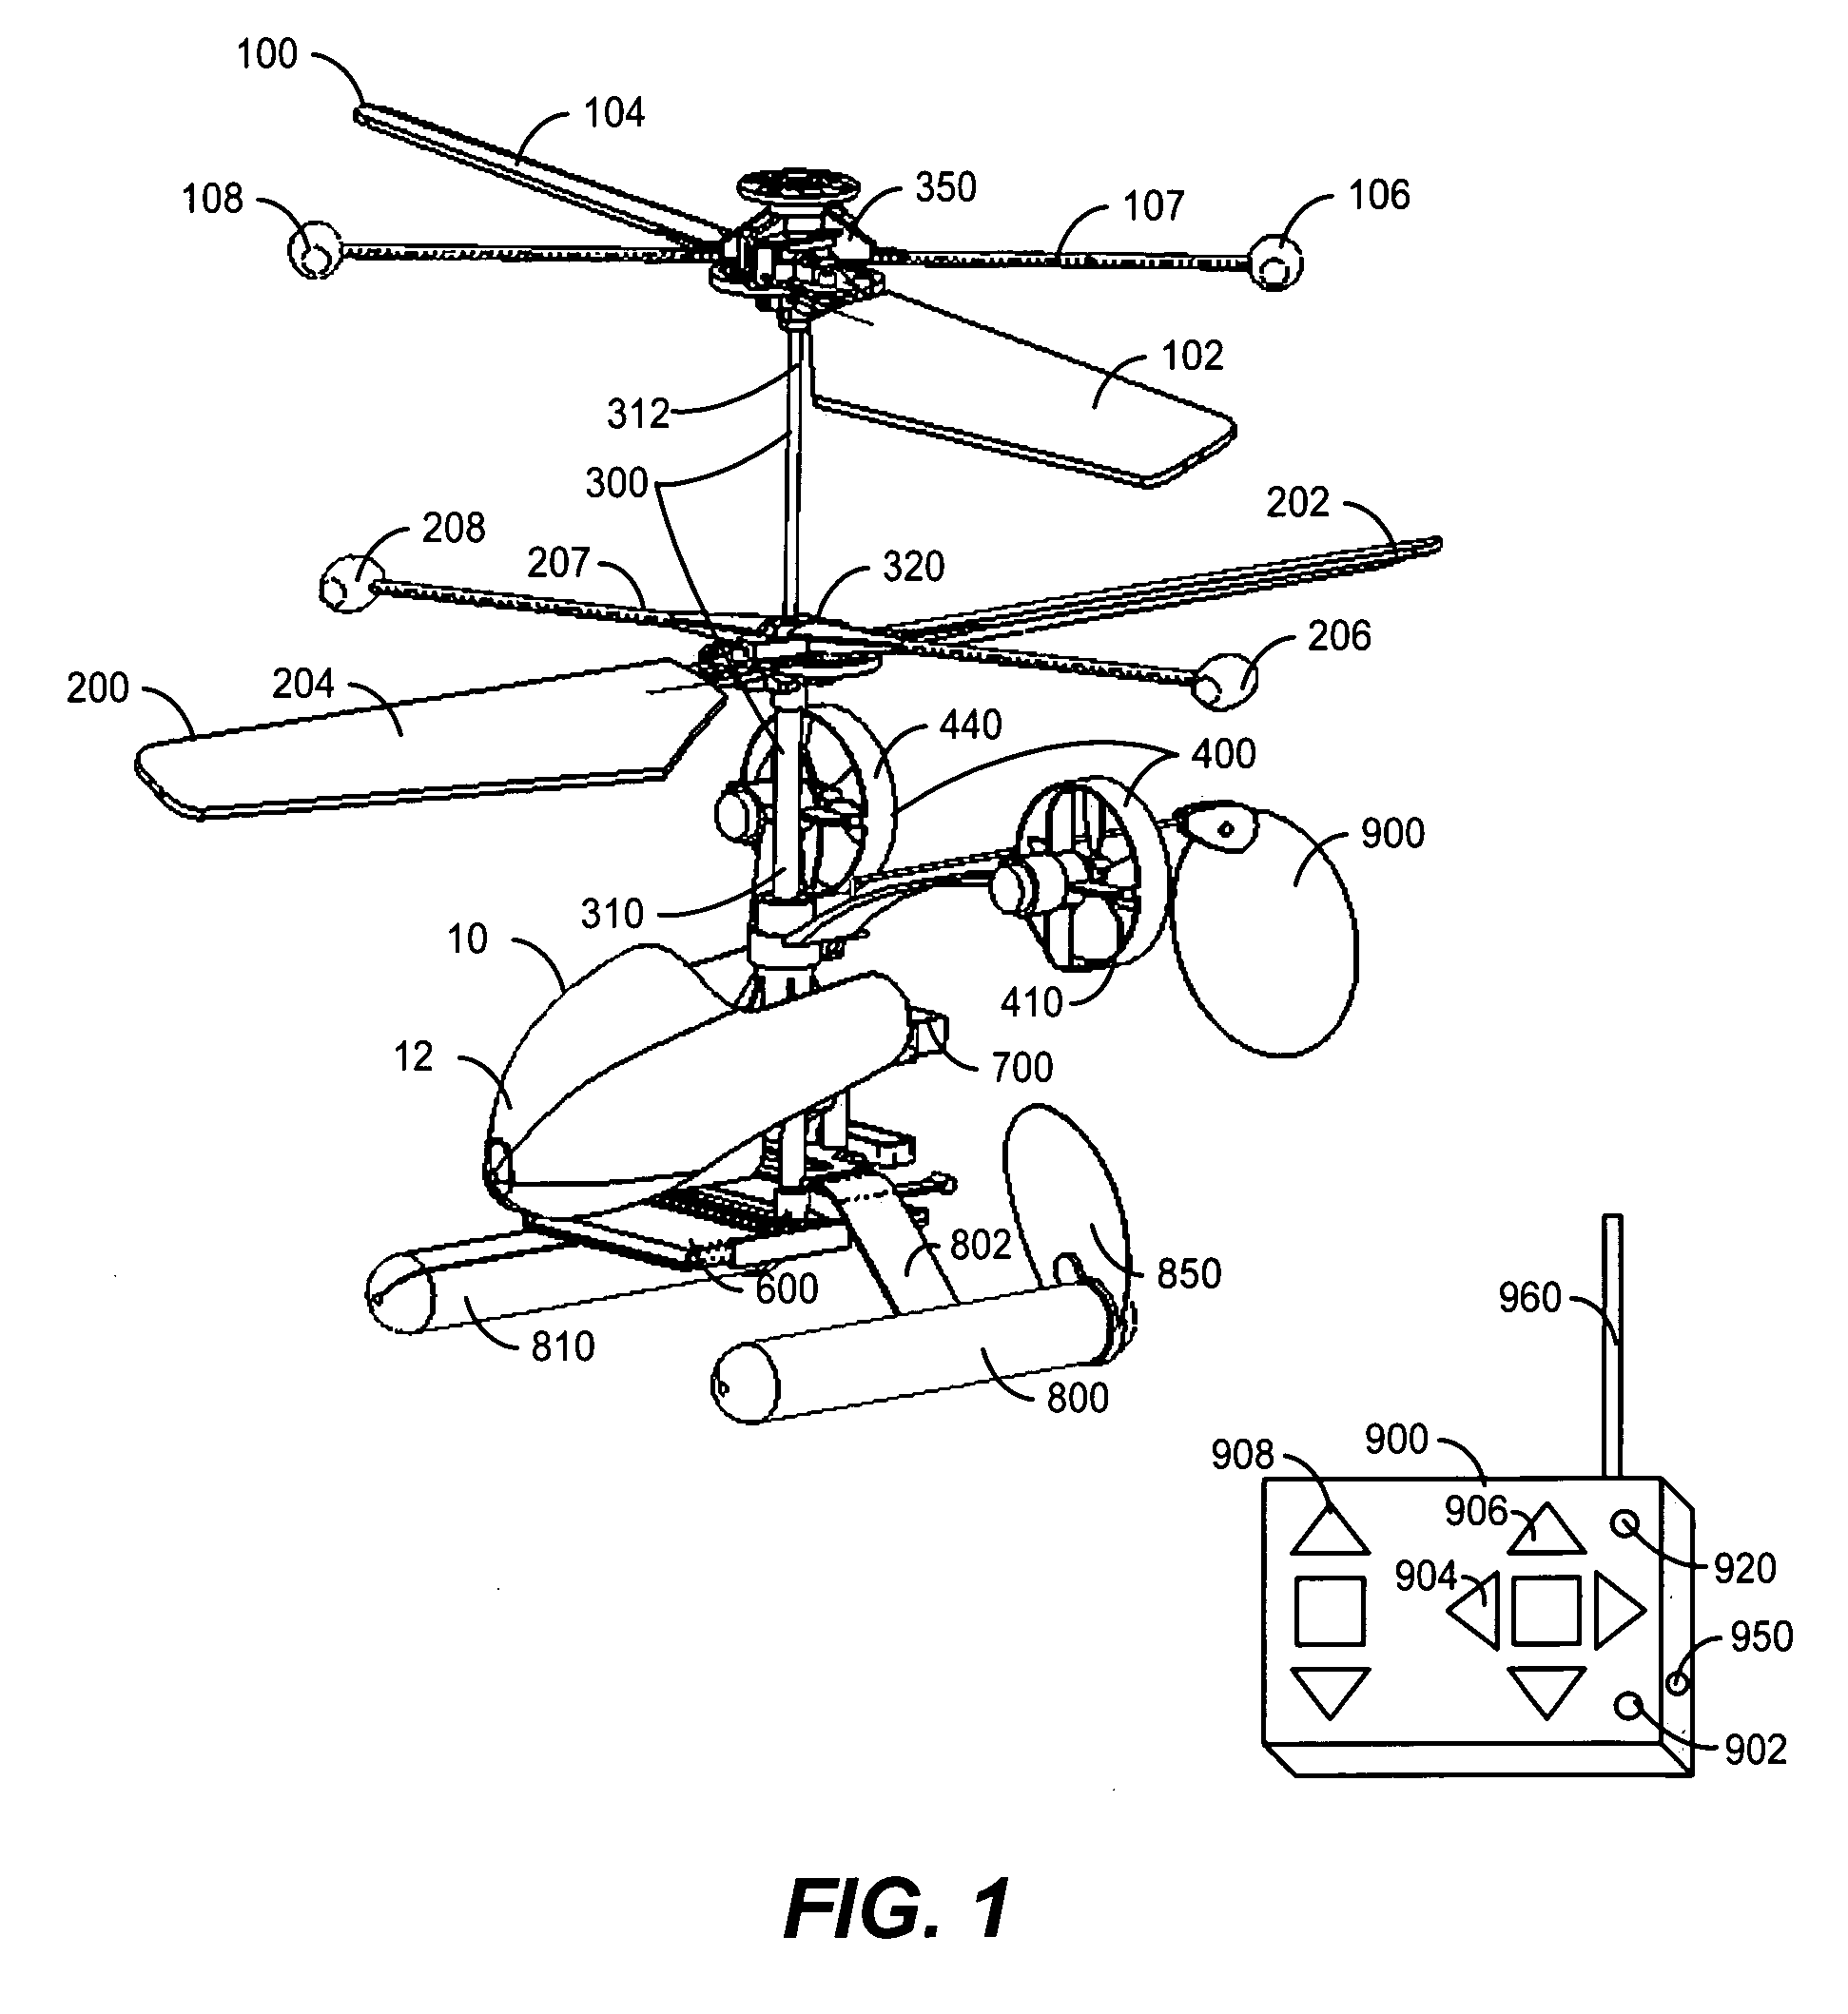 Rotary-wing vehicle system and methods patent